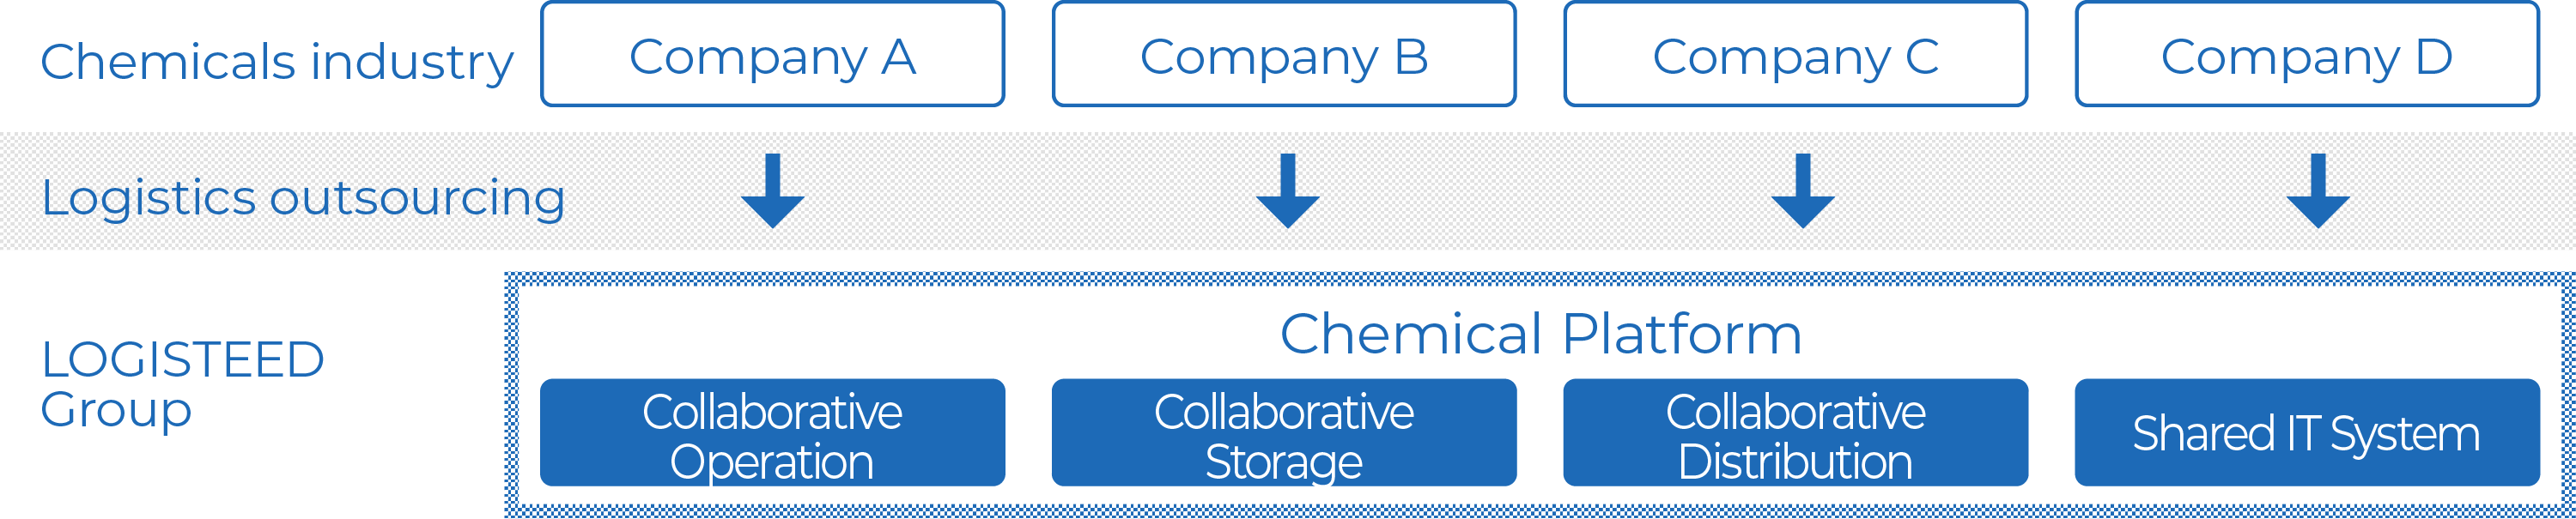 Our Chemical Platform